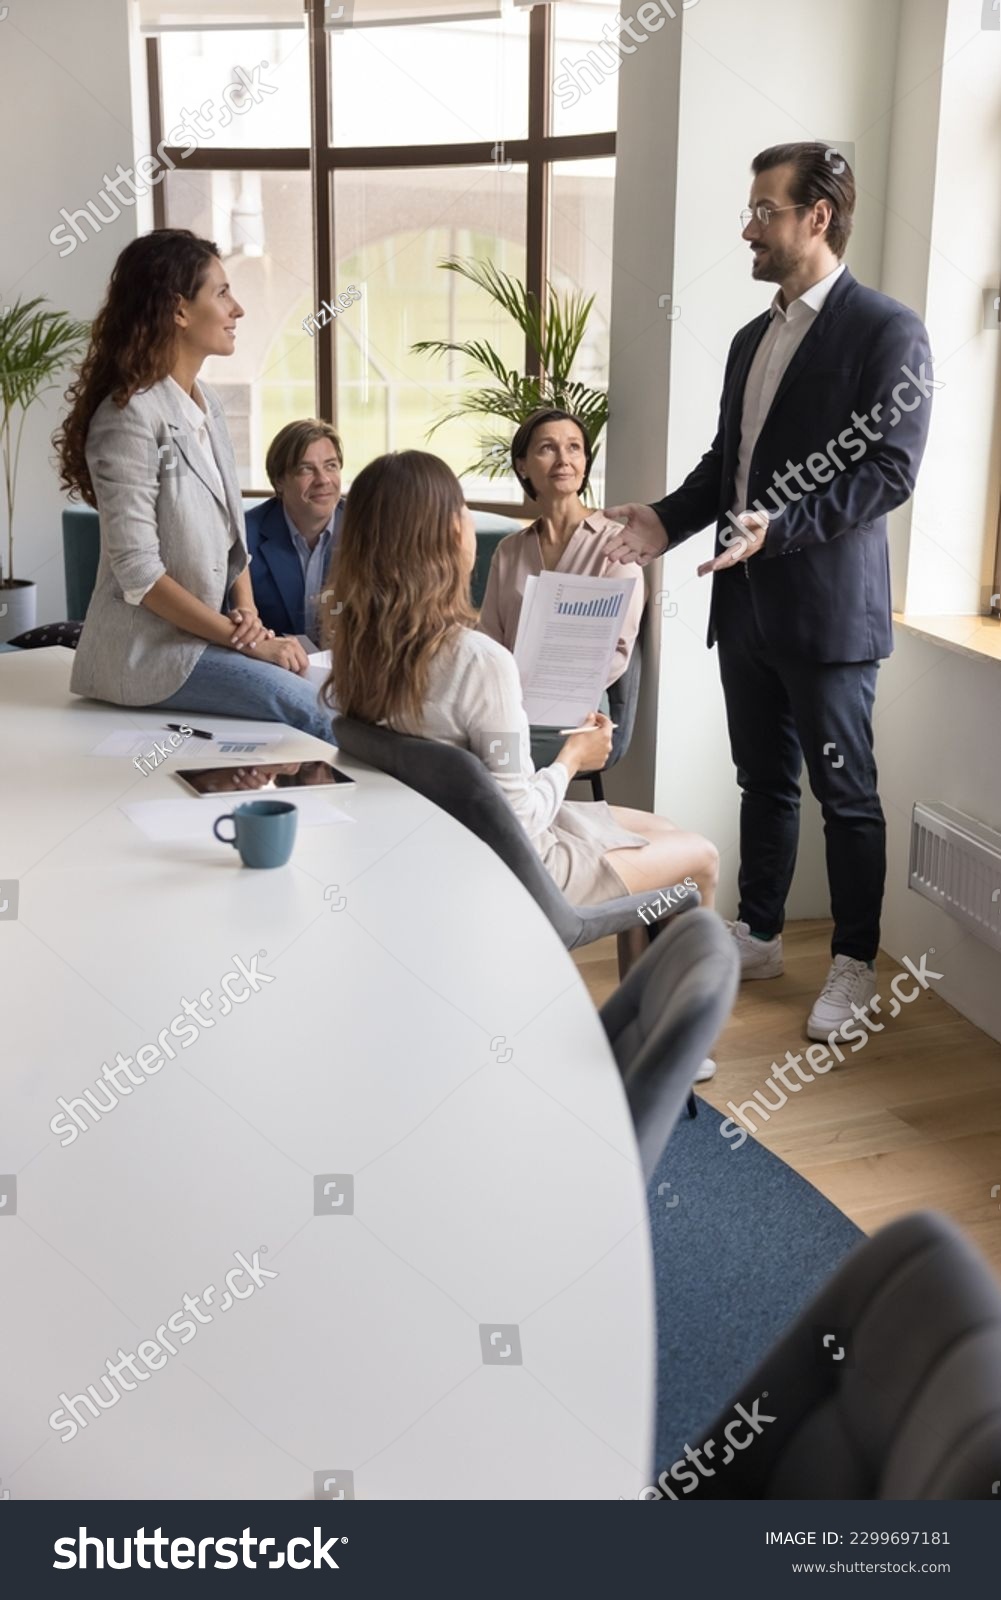 Confident businessman, male boss in suit explains new project details, share business strategy, makes speech stand in front of company staff members during corporate group briefing in conference room #2299697181